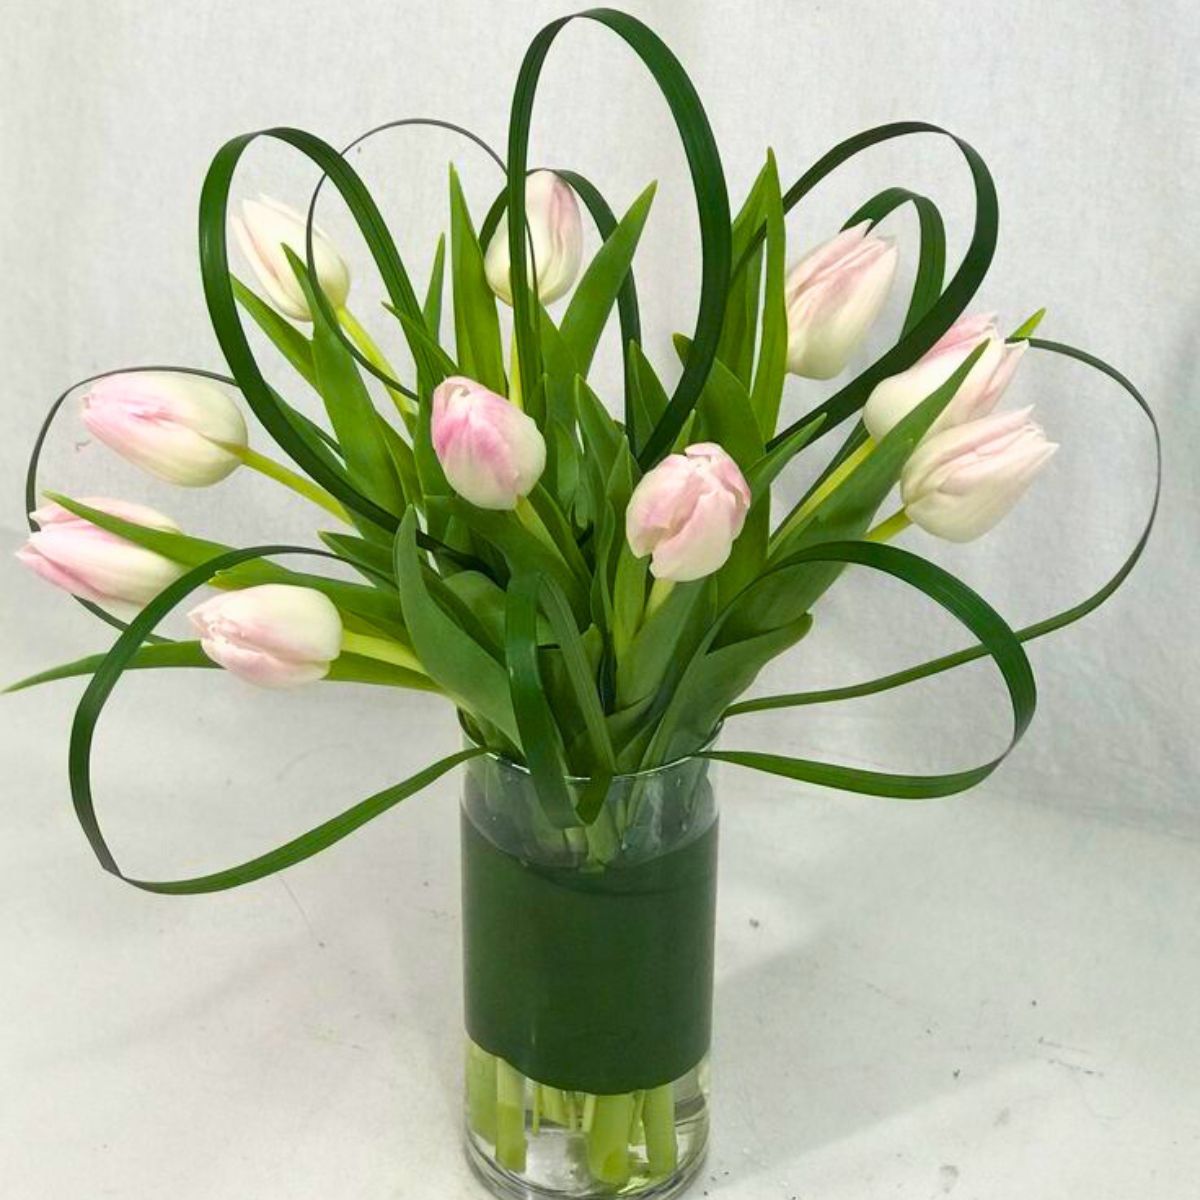 Adomex Orca​Green’s Lilygrass Is the Perfect Decorative Green for Floral Designs